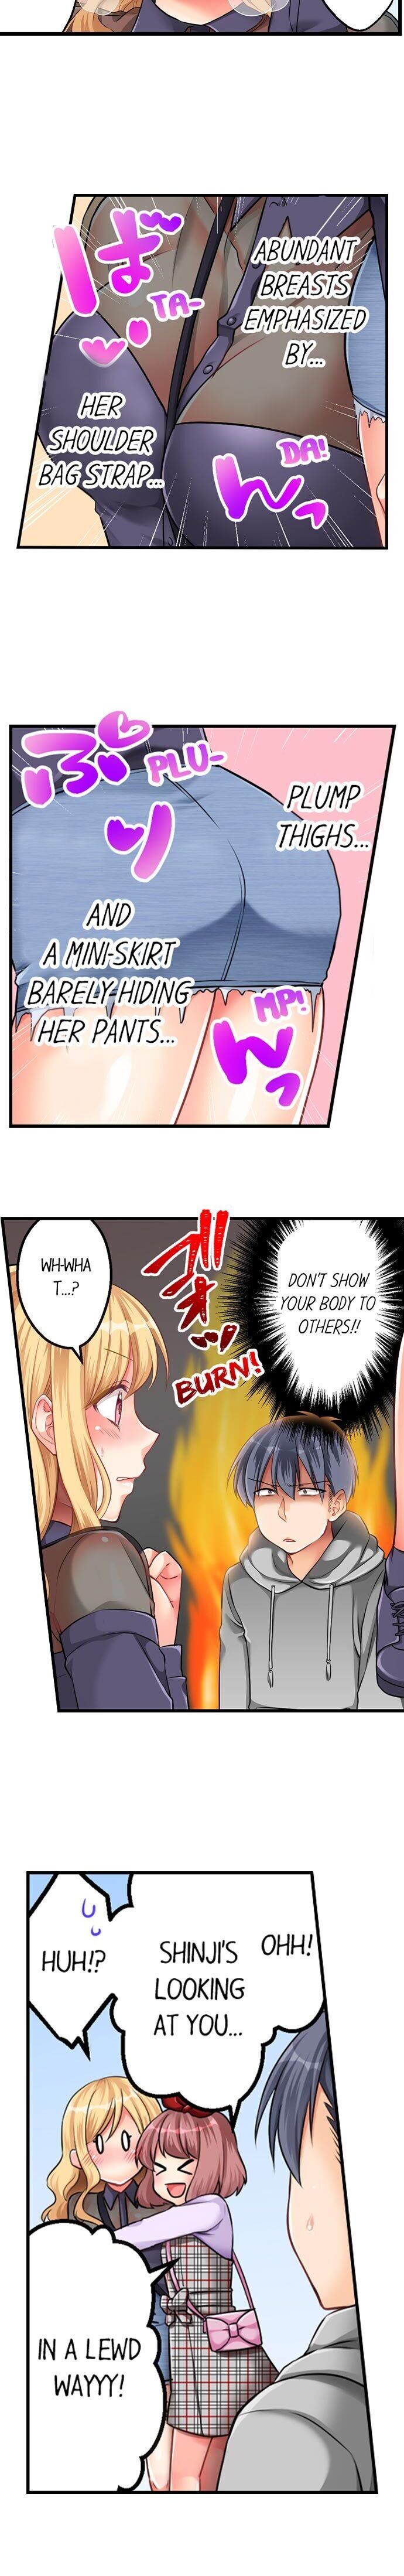 Raw Sex With a Country Gal ~I’ll Show You the Ropes~ - Chapter 7 Page 4